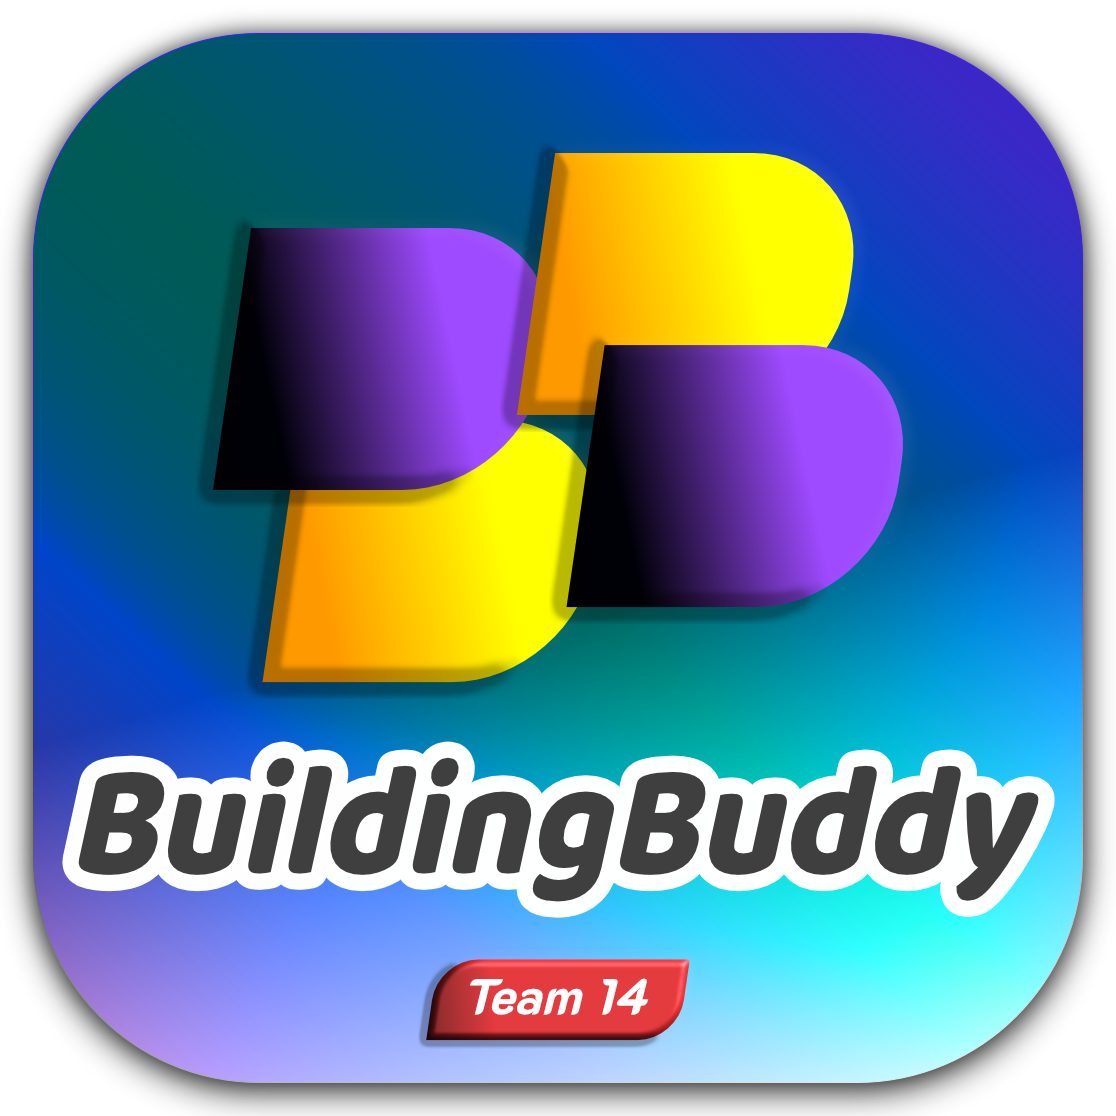 the icon for the BuildingBuddy app <br>App developers: Team 14 at Western University <br>Icon designer: Jason Shew